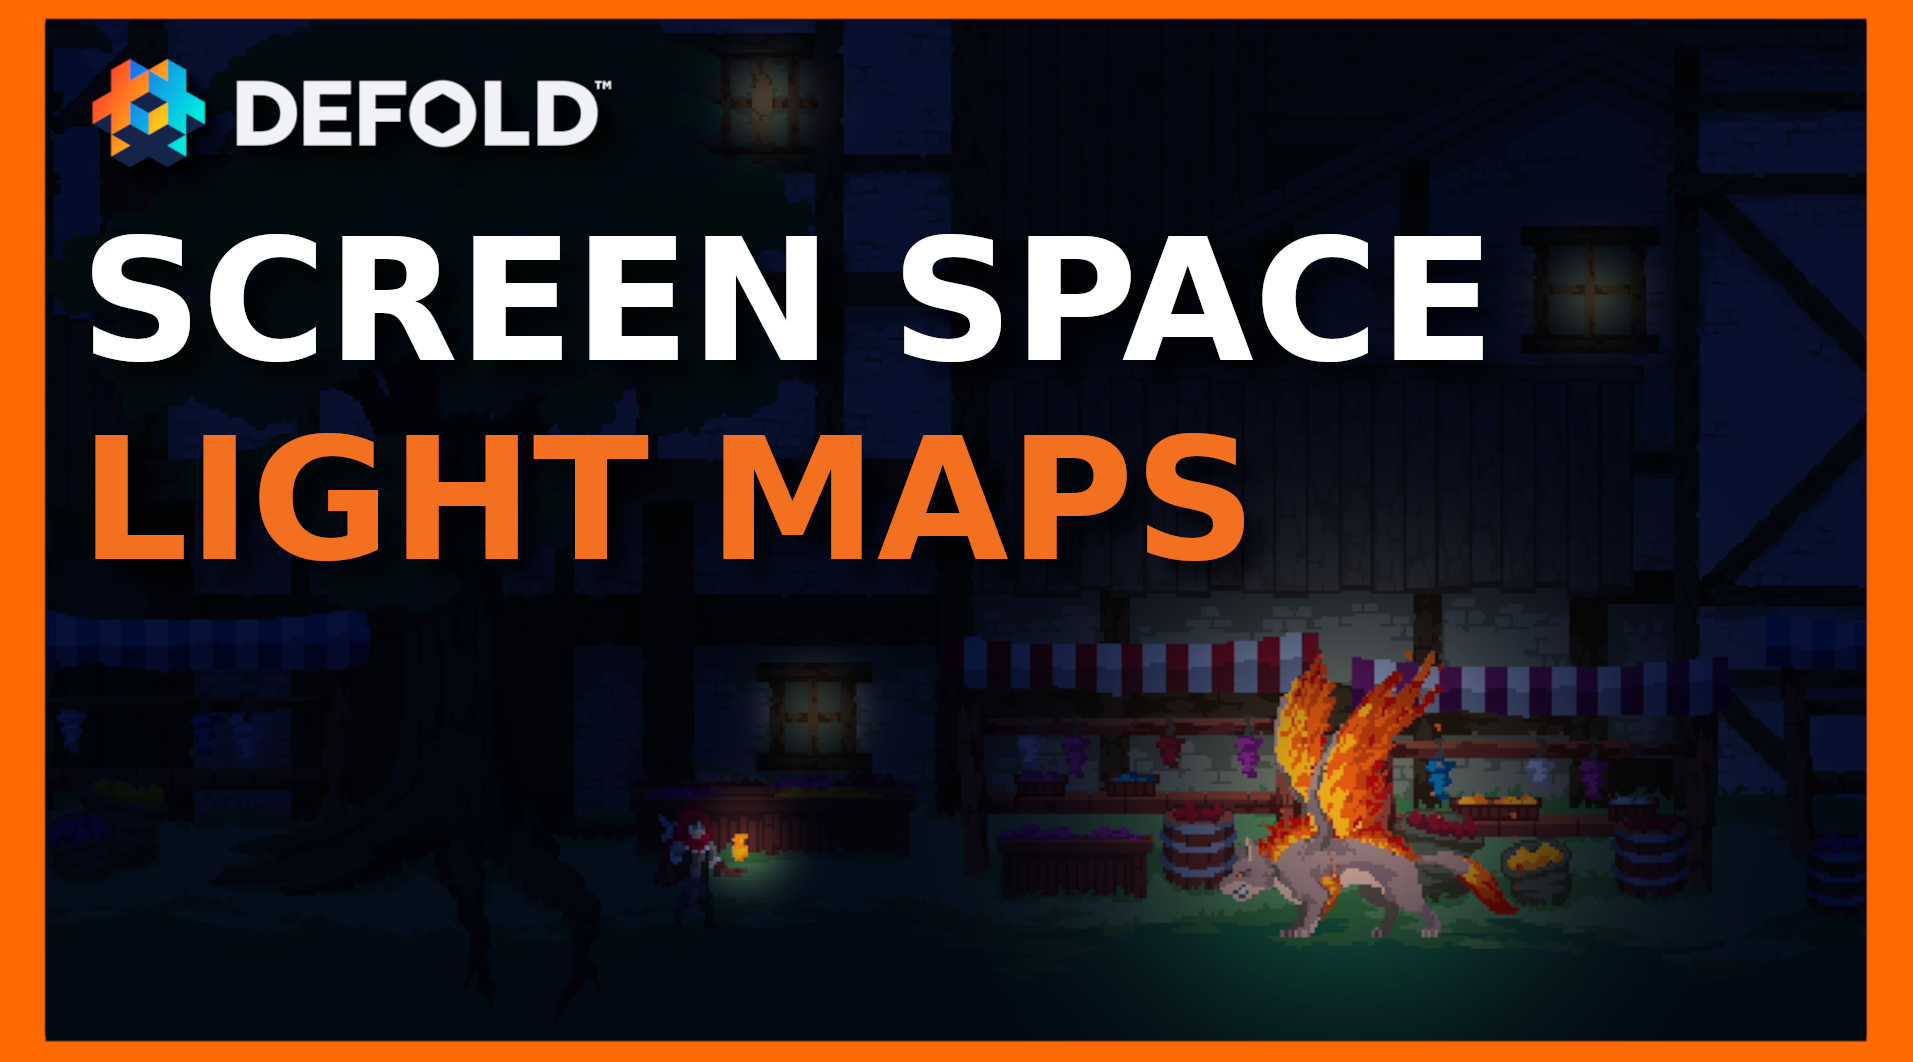 Screen Space Lightmaps - video tutorial on YouTube exaplining how to create simple lighting and how to add lights to Defold game project.